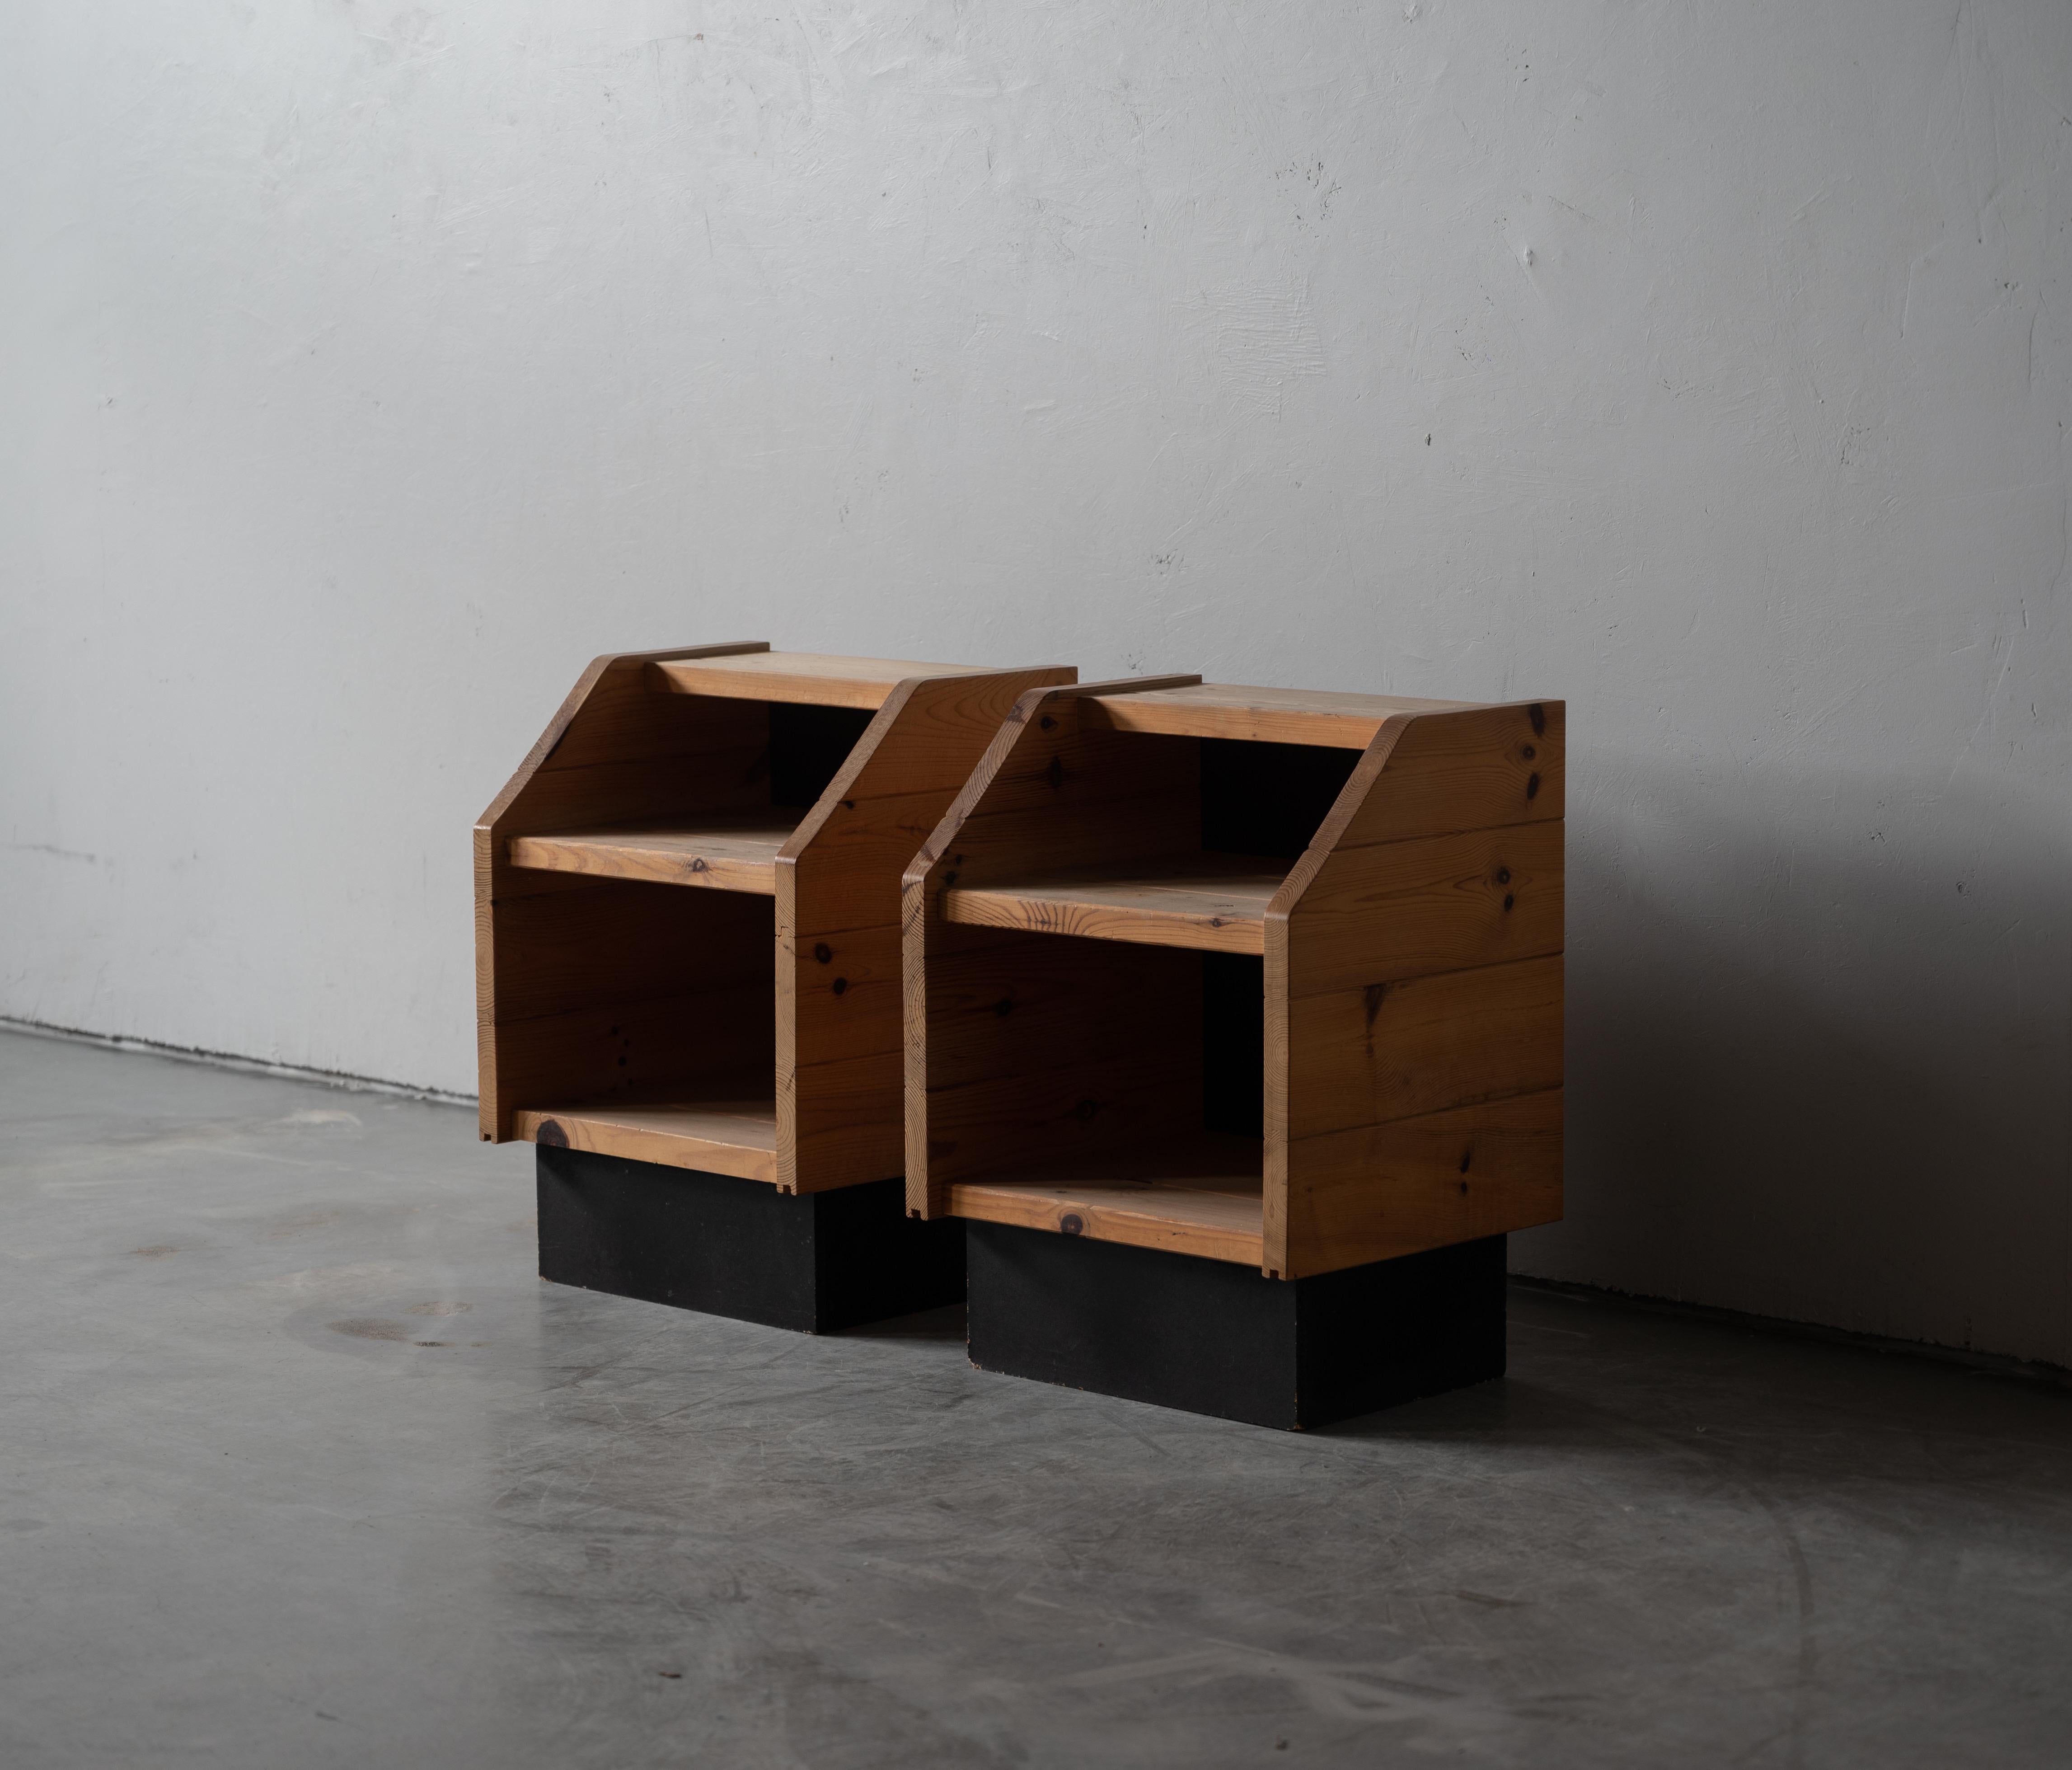 A set of bedside cabinets / tables / nightstands. Designed and produced in Denmark, 1970s. In solid pine.

Other designers working in similar style and materials include Axel Einar Hjorth, Roland Wilhelmsson, Pierre Chapo, and Charlotte Perriand.